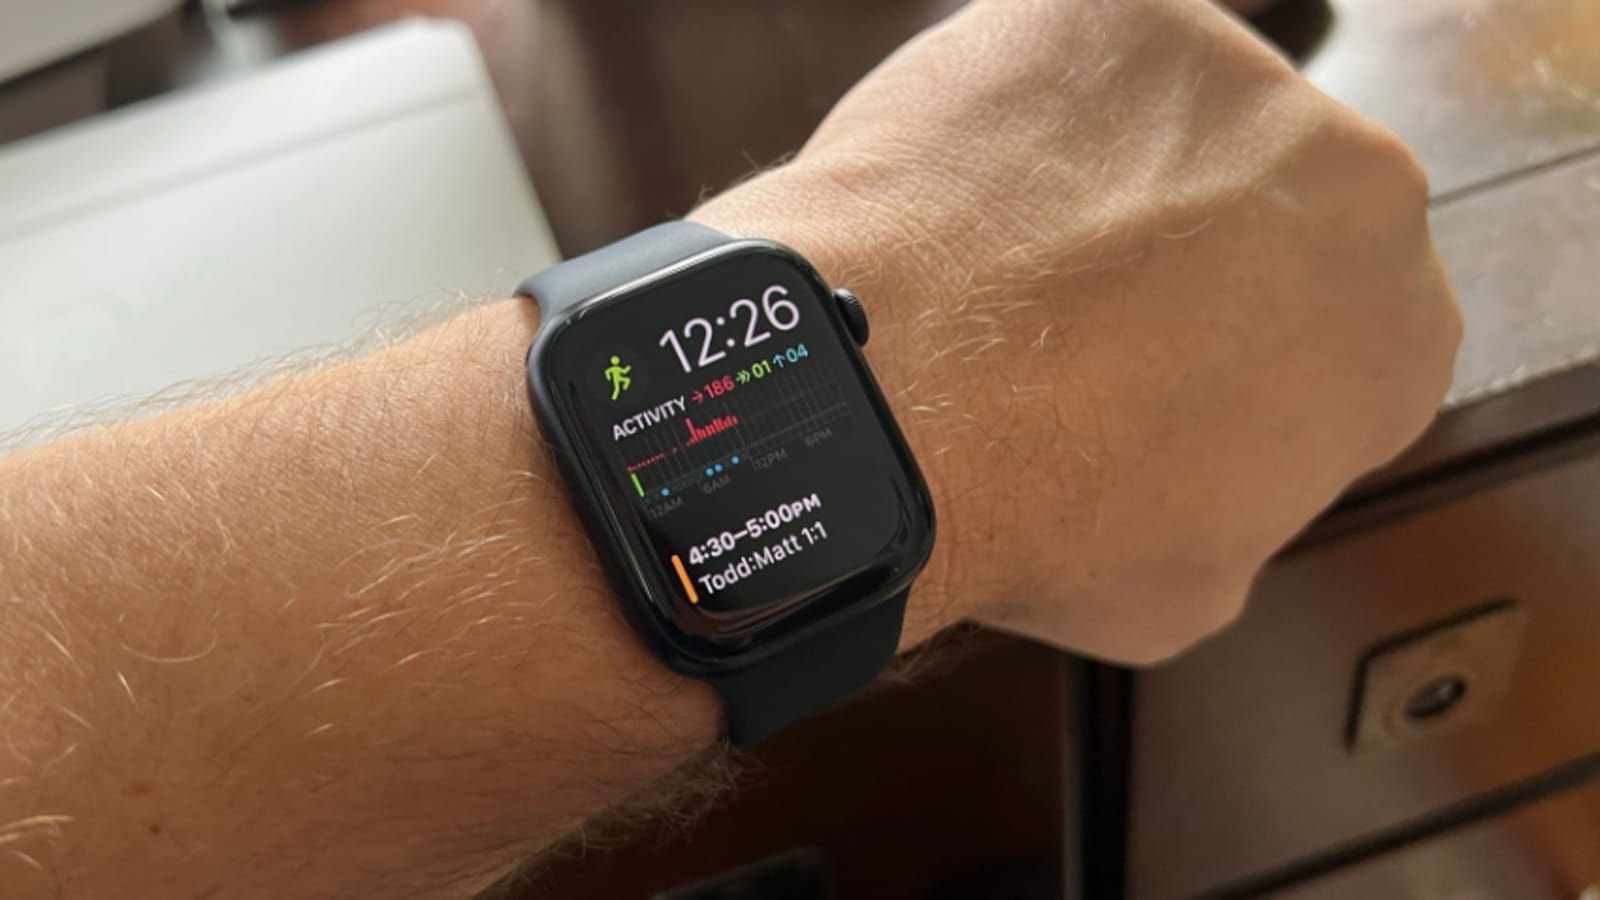 Complete Guide to the Workout App for your new Apple Watch